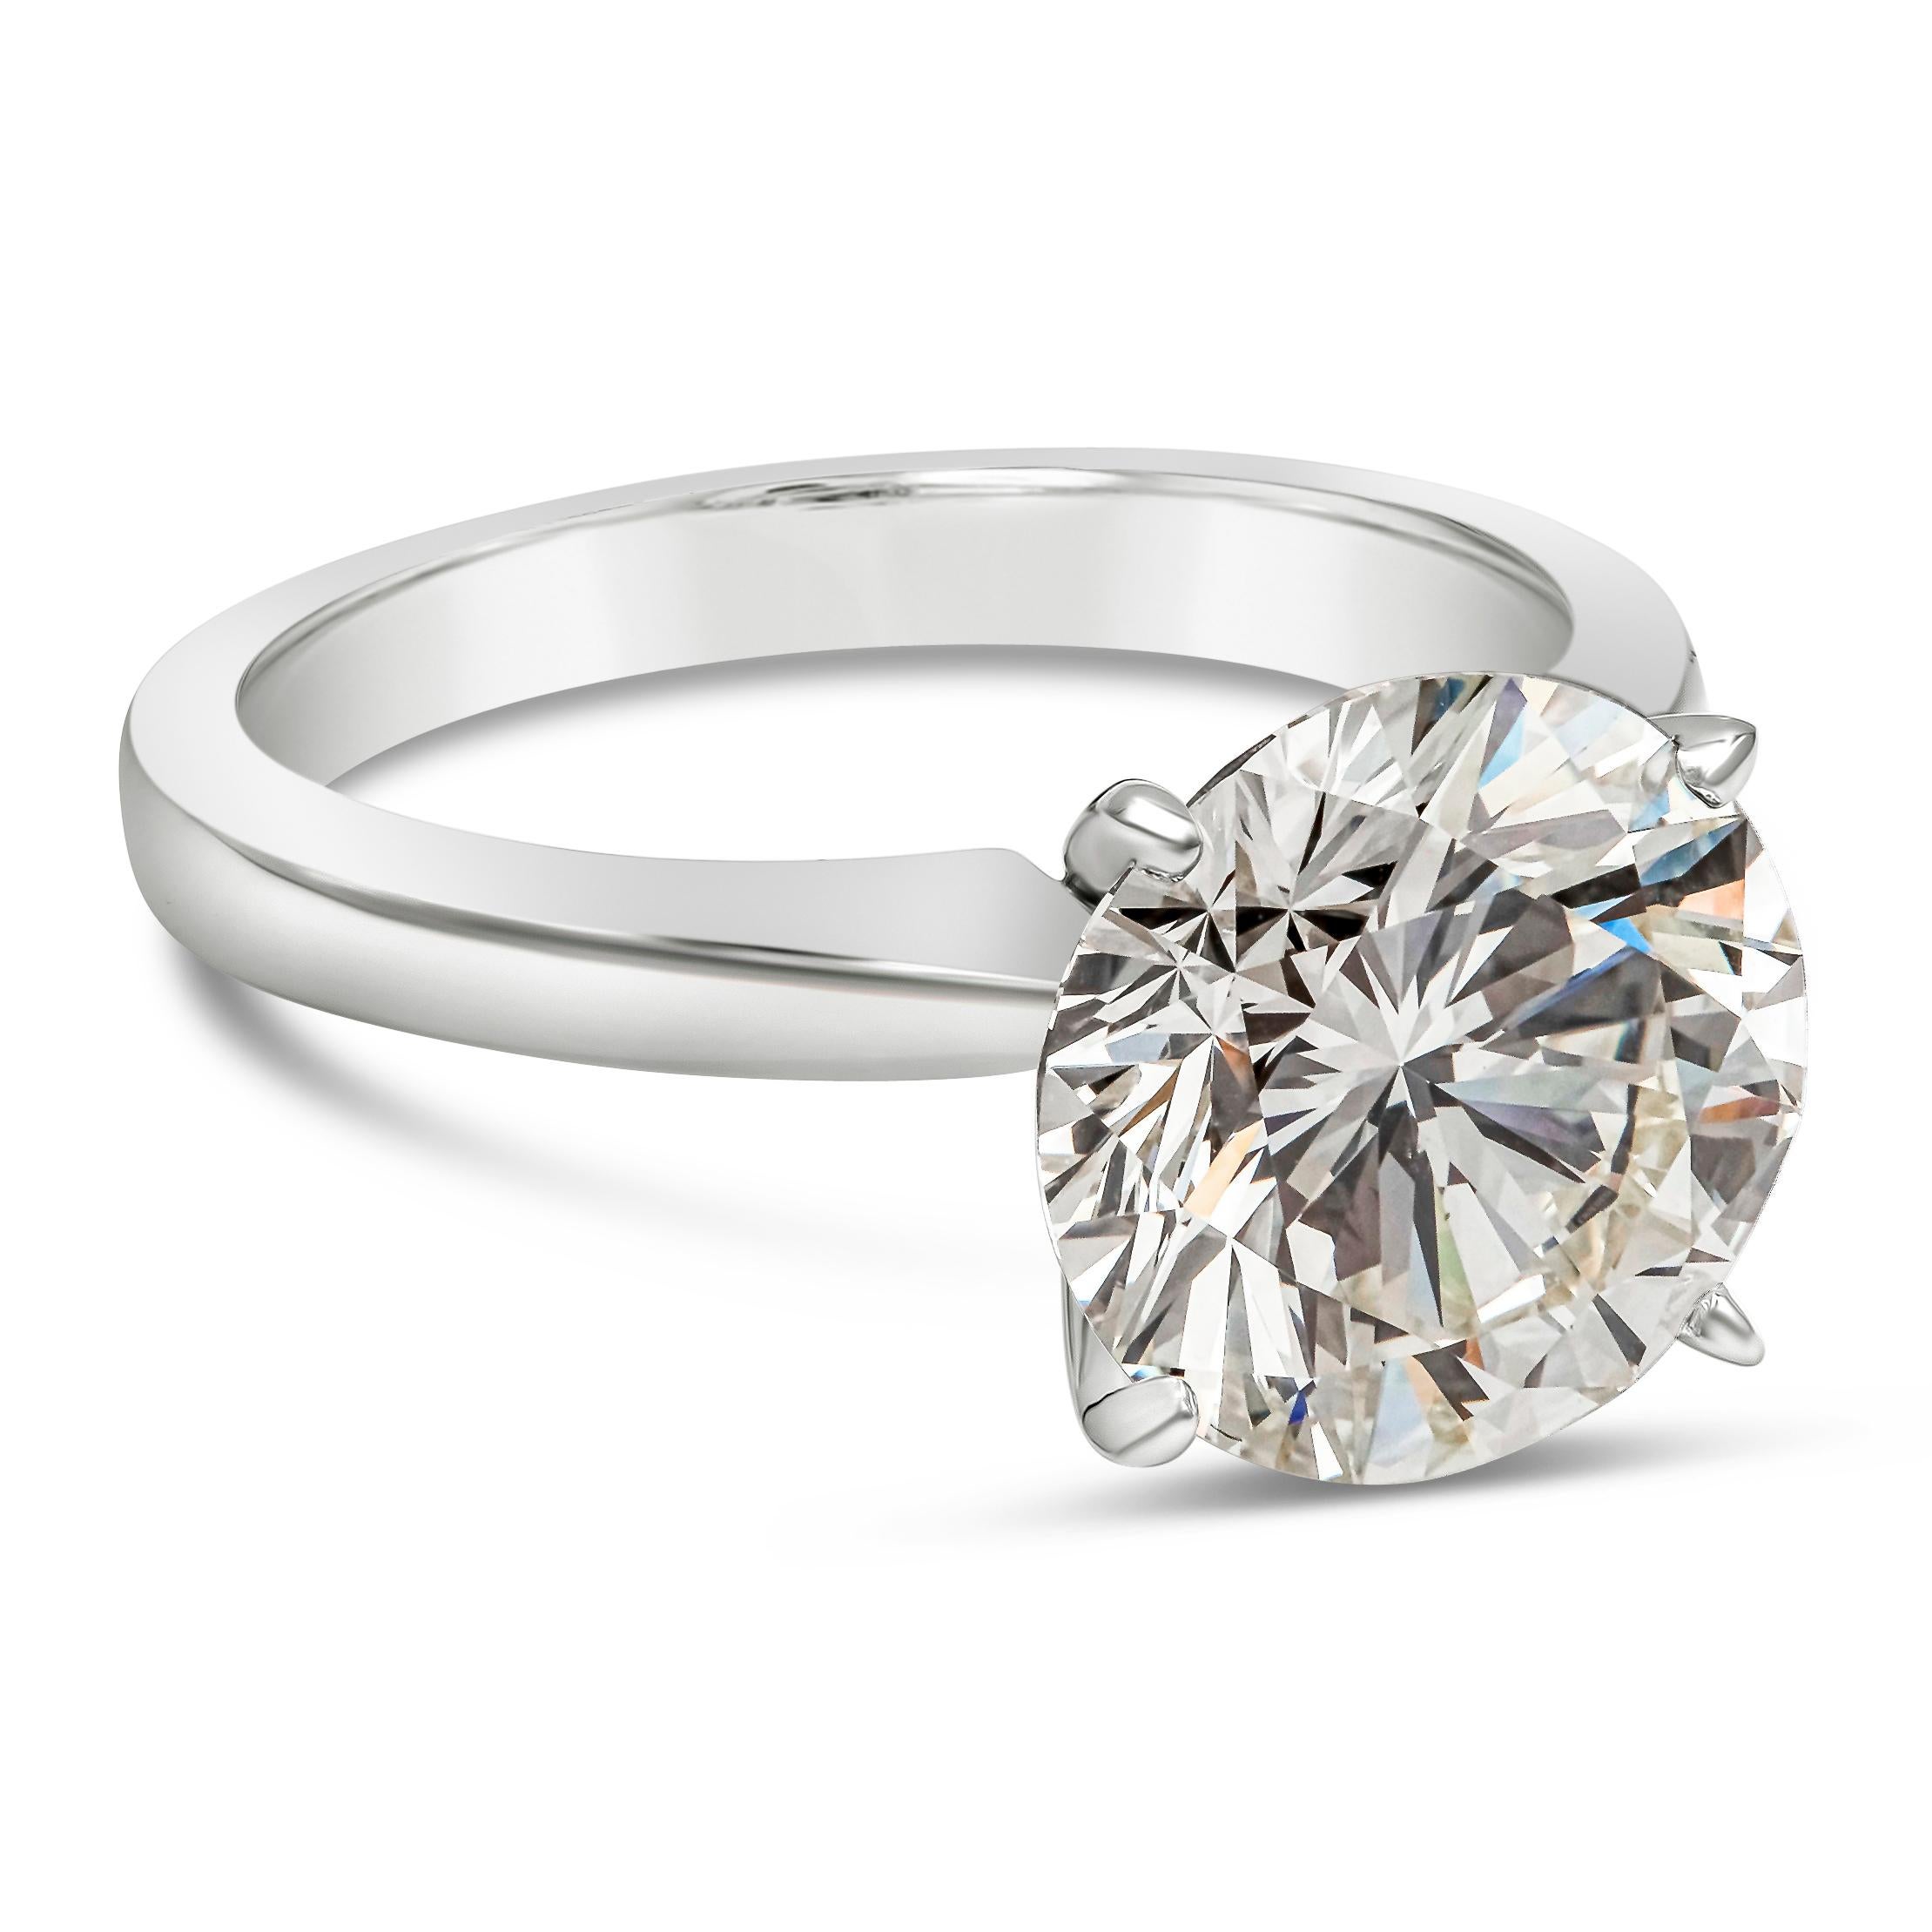 This elegant and classic solitaire engagement ring style showcases a brilliant round diamond weighing 3.68 carats total, GIA certified as K color and VS2 in clarity, set in a four prong basket setting. Finely made in 18K white gold. Size 6 US